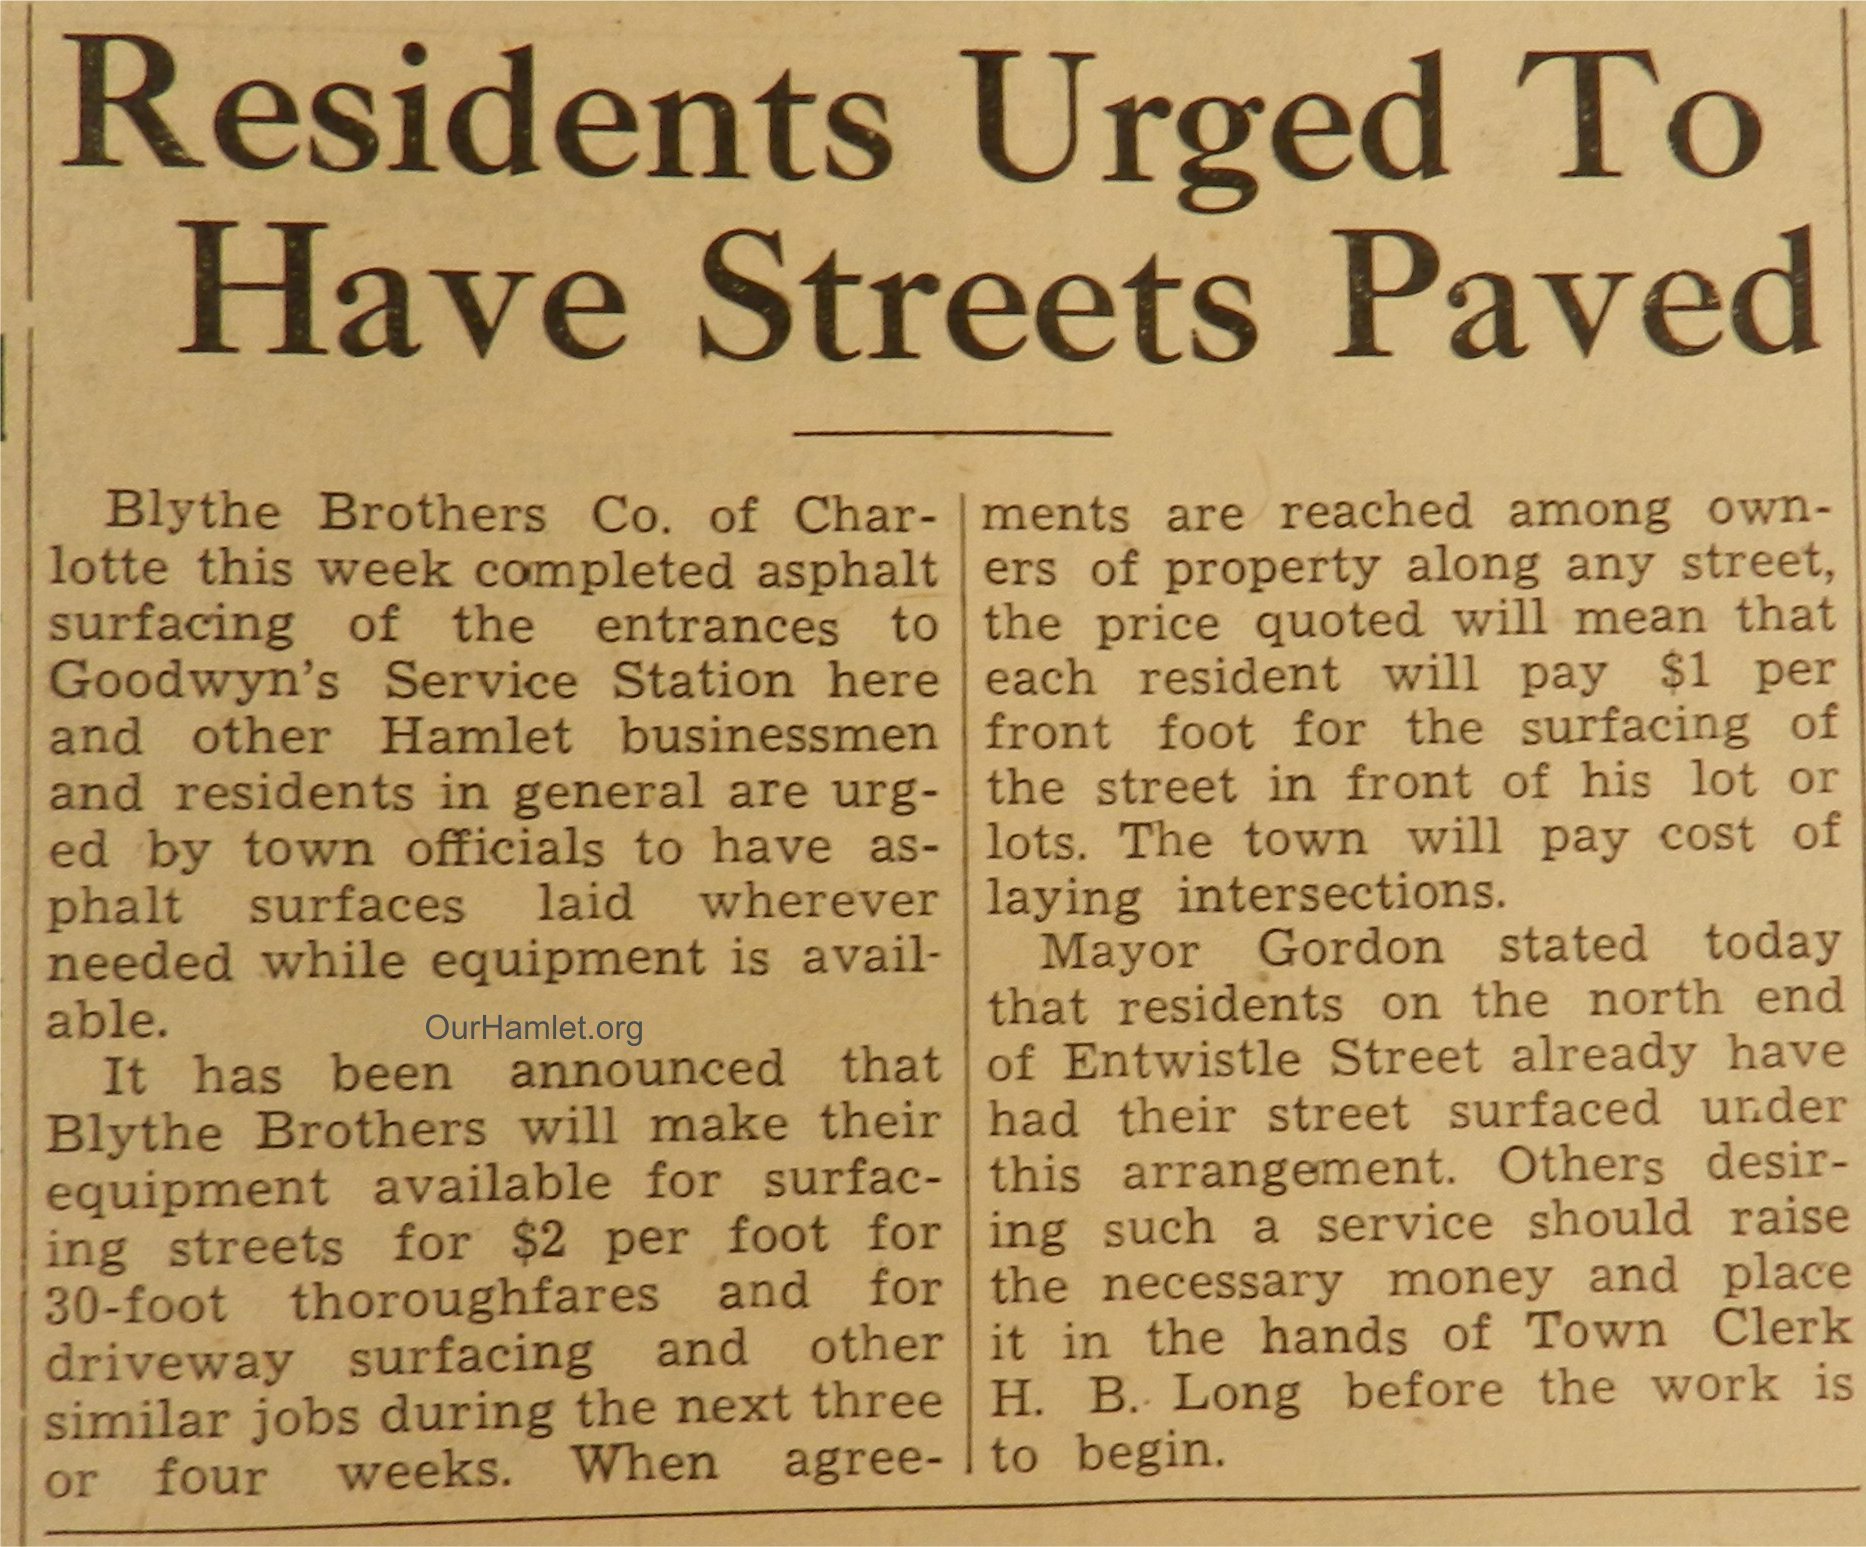 1947 Streets paved OH.jpg